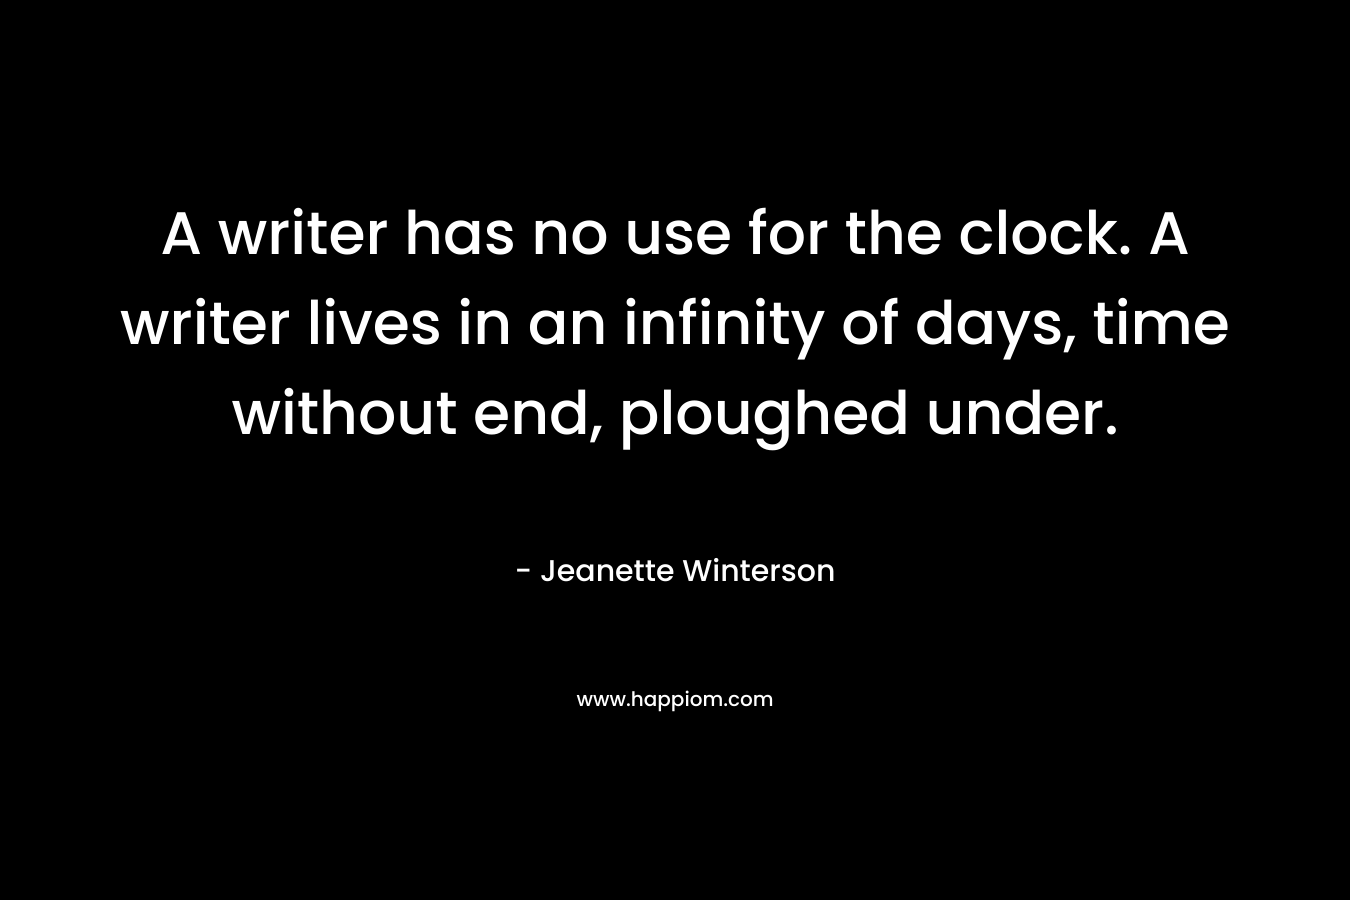 A writer has no use for the clock. A writer lives in an infinity of days, time without end, ploughed under. – Jeanette Winterson